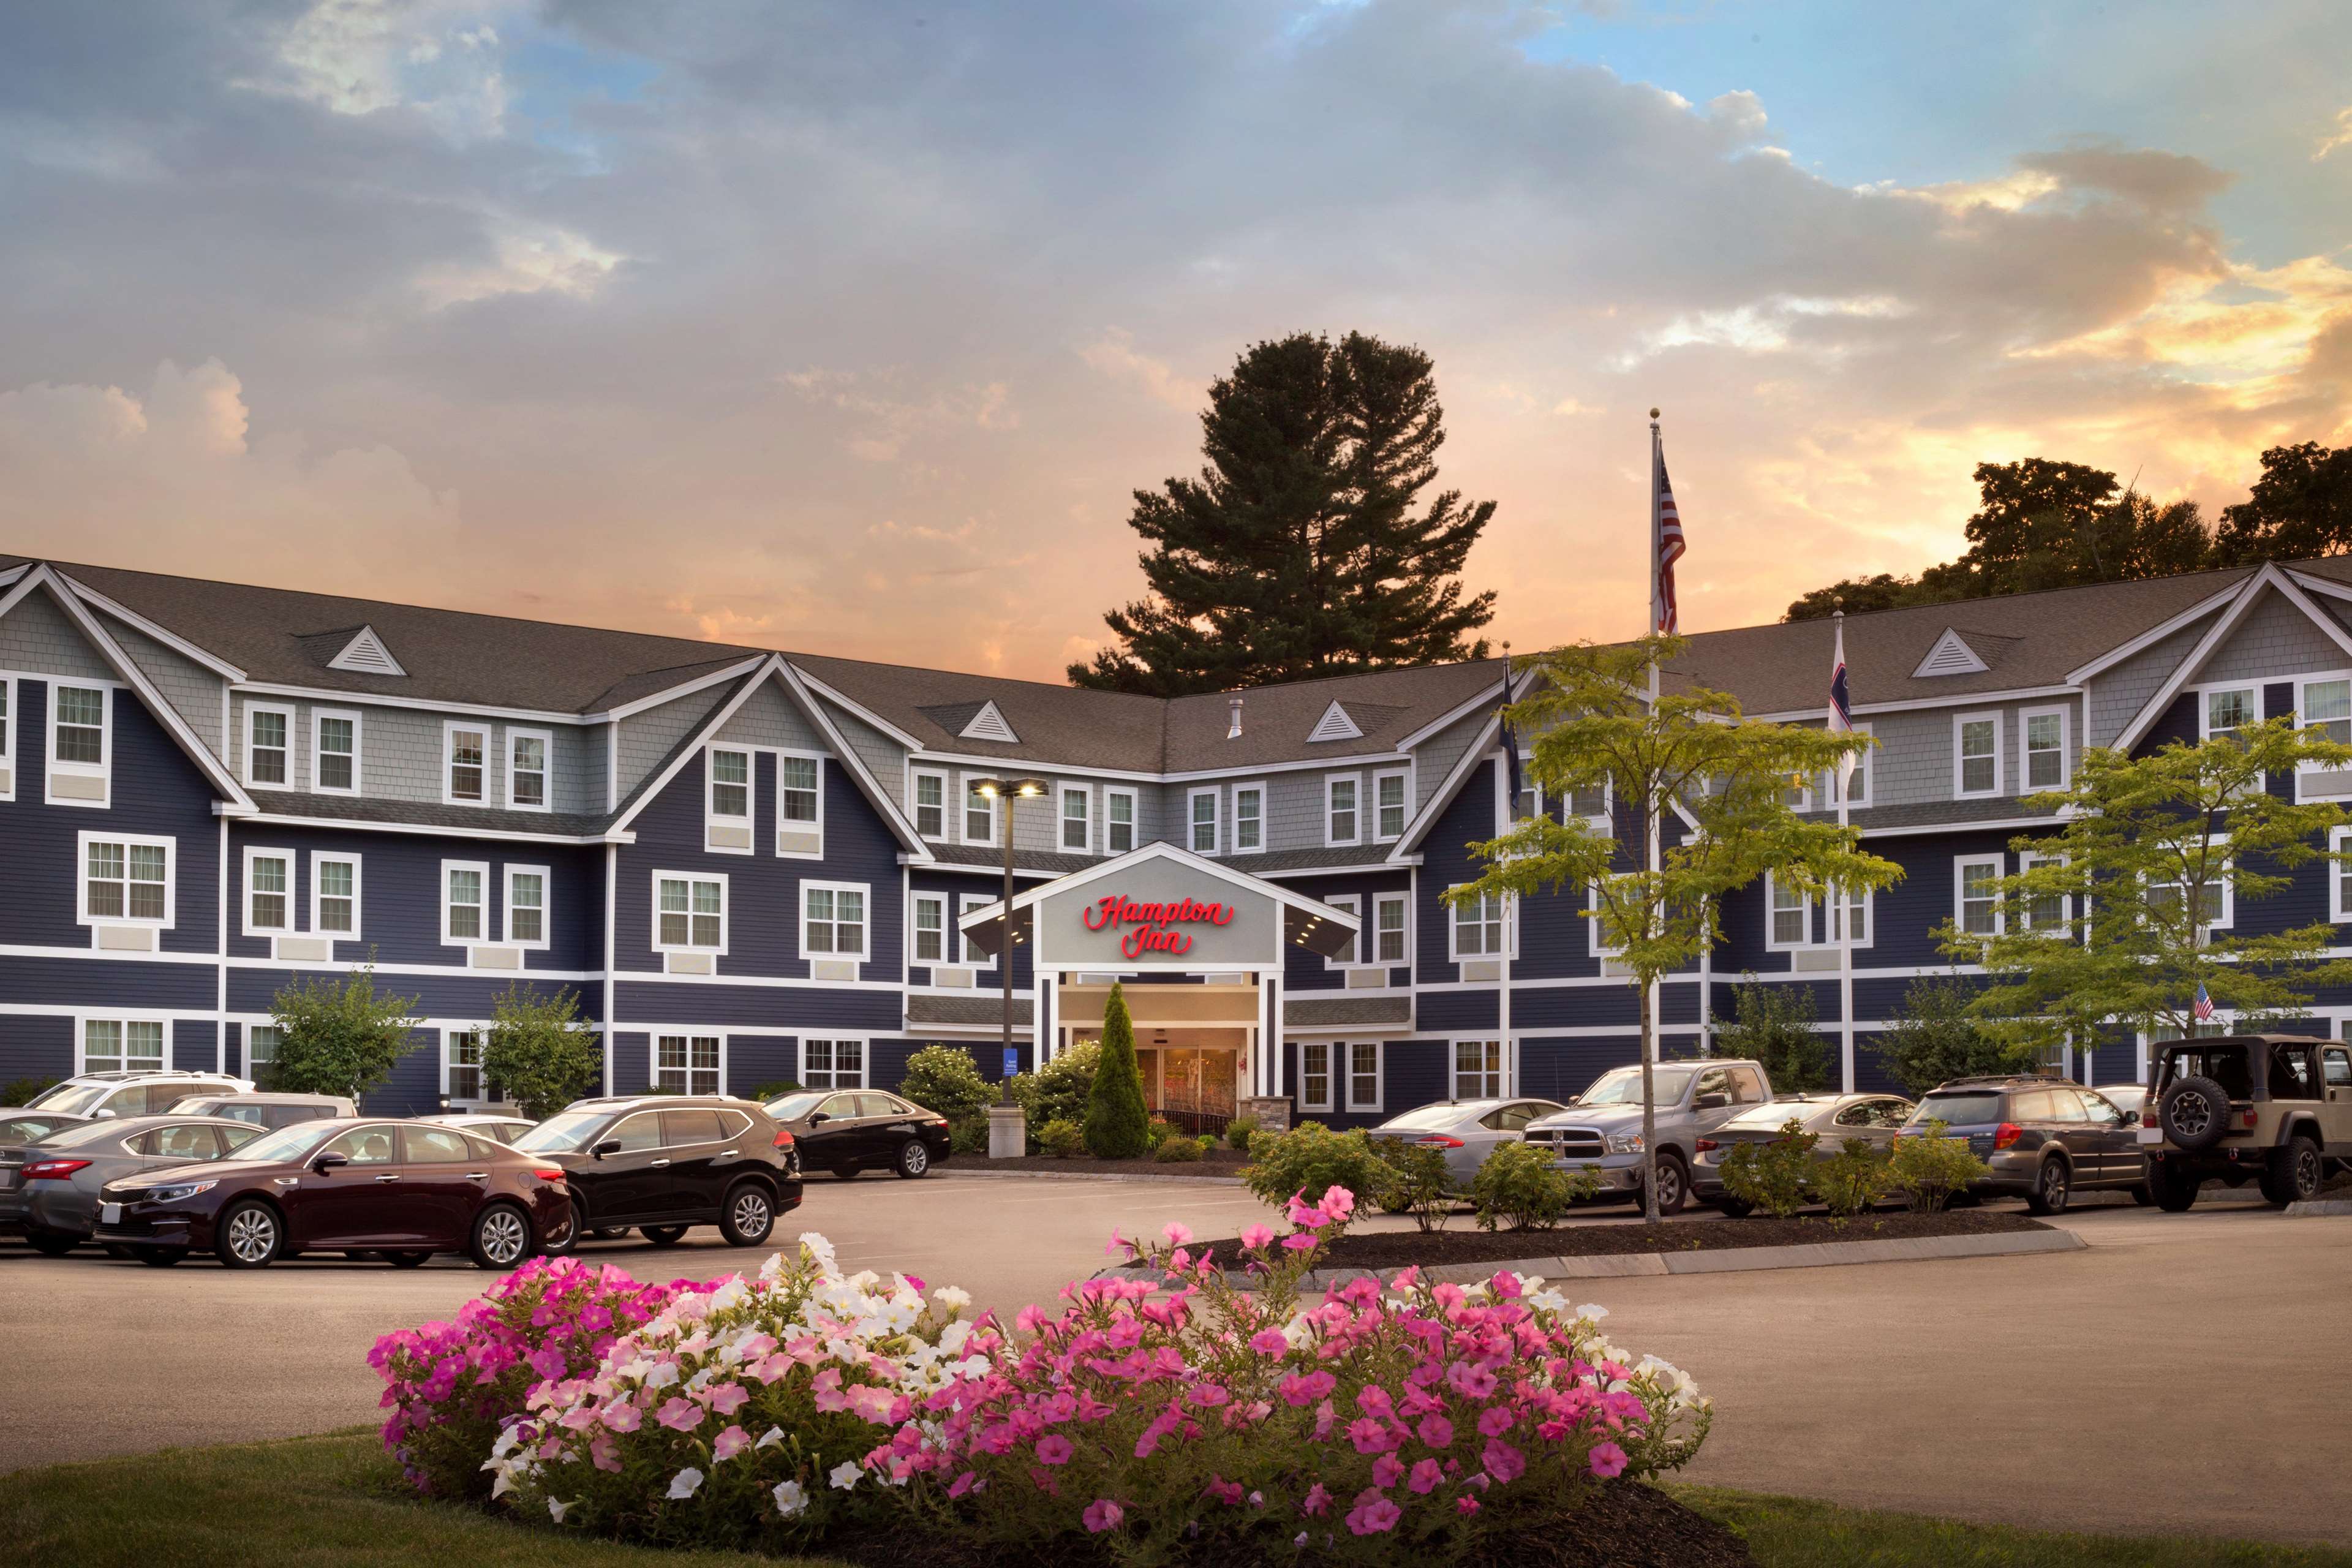 Get directions, reviews and information for Hampton Inn Dover in Dover, NH....